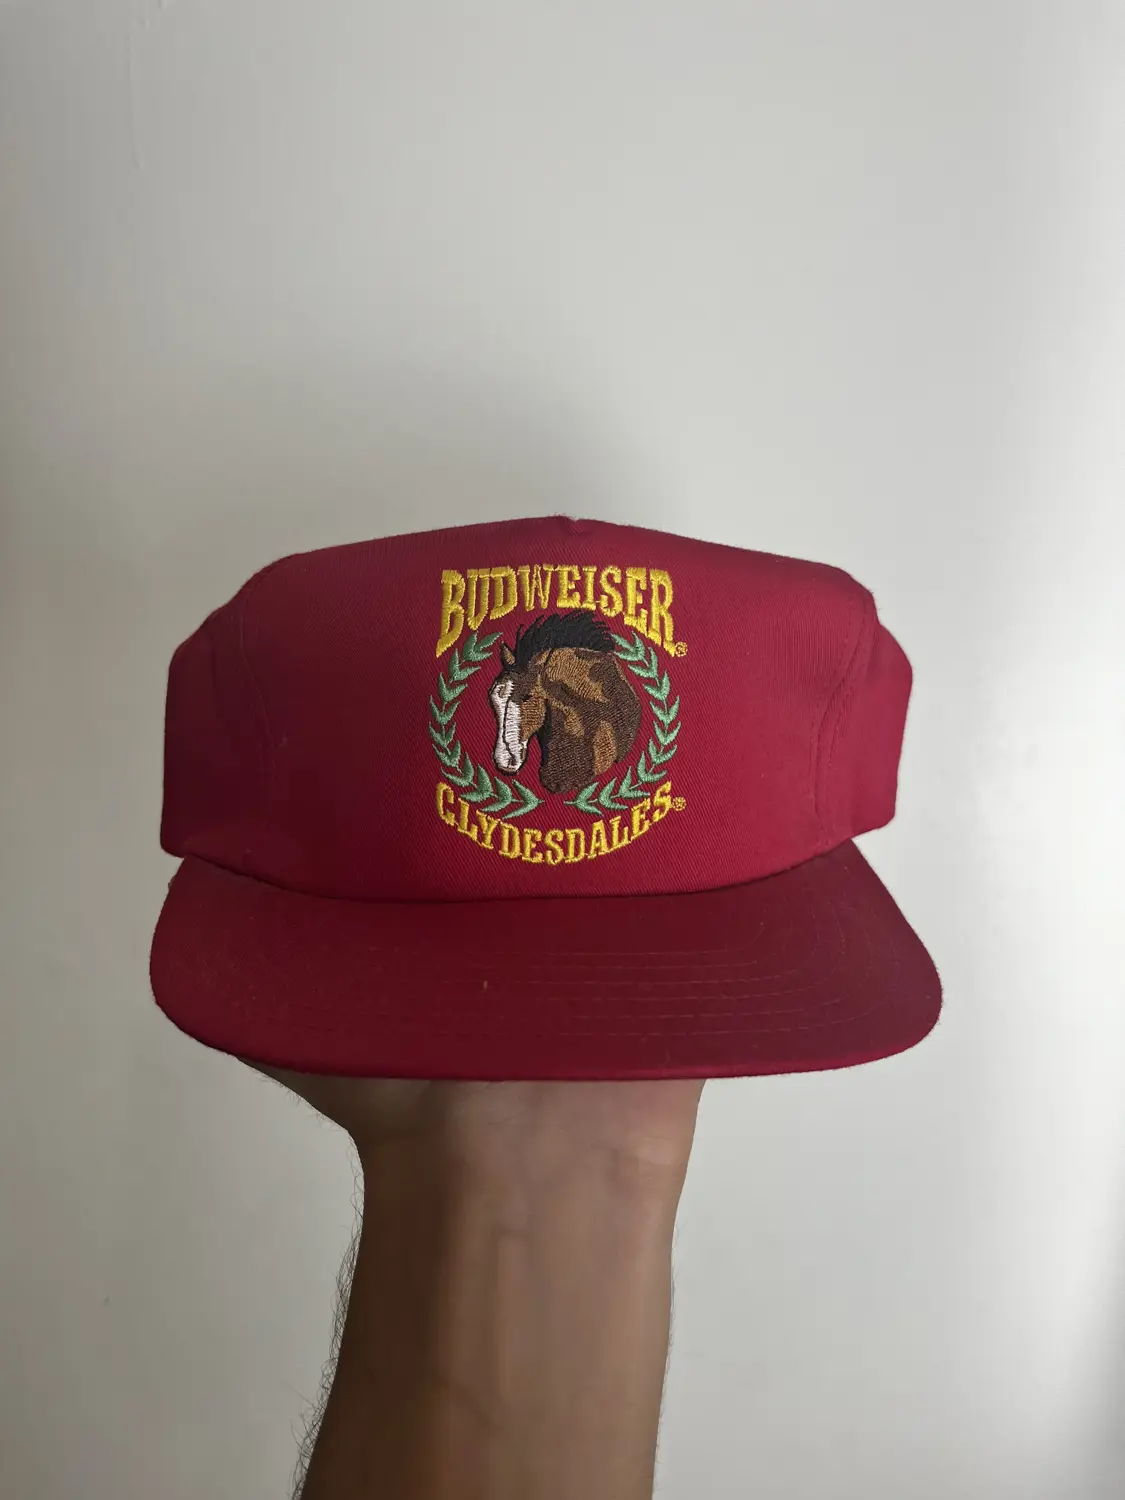 Budweiser Clydesdales hat